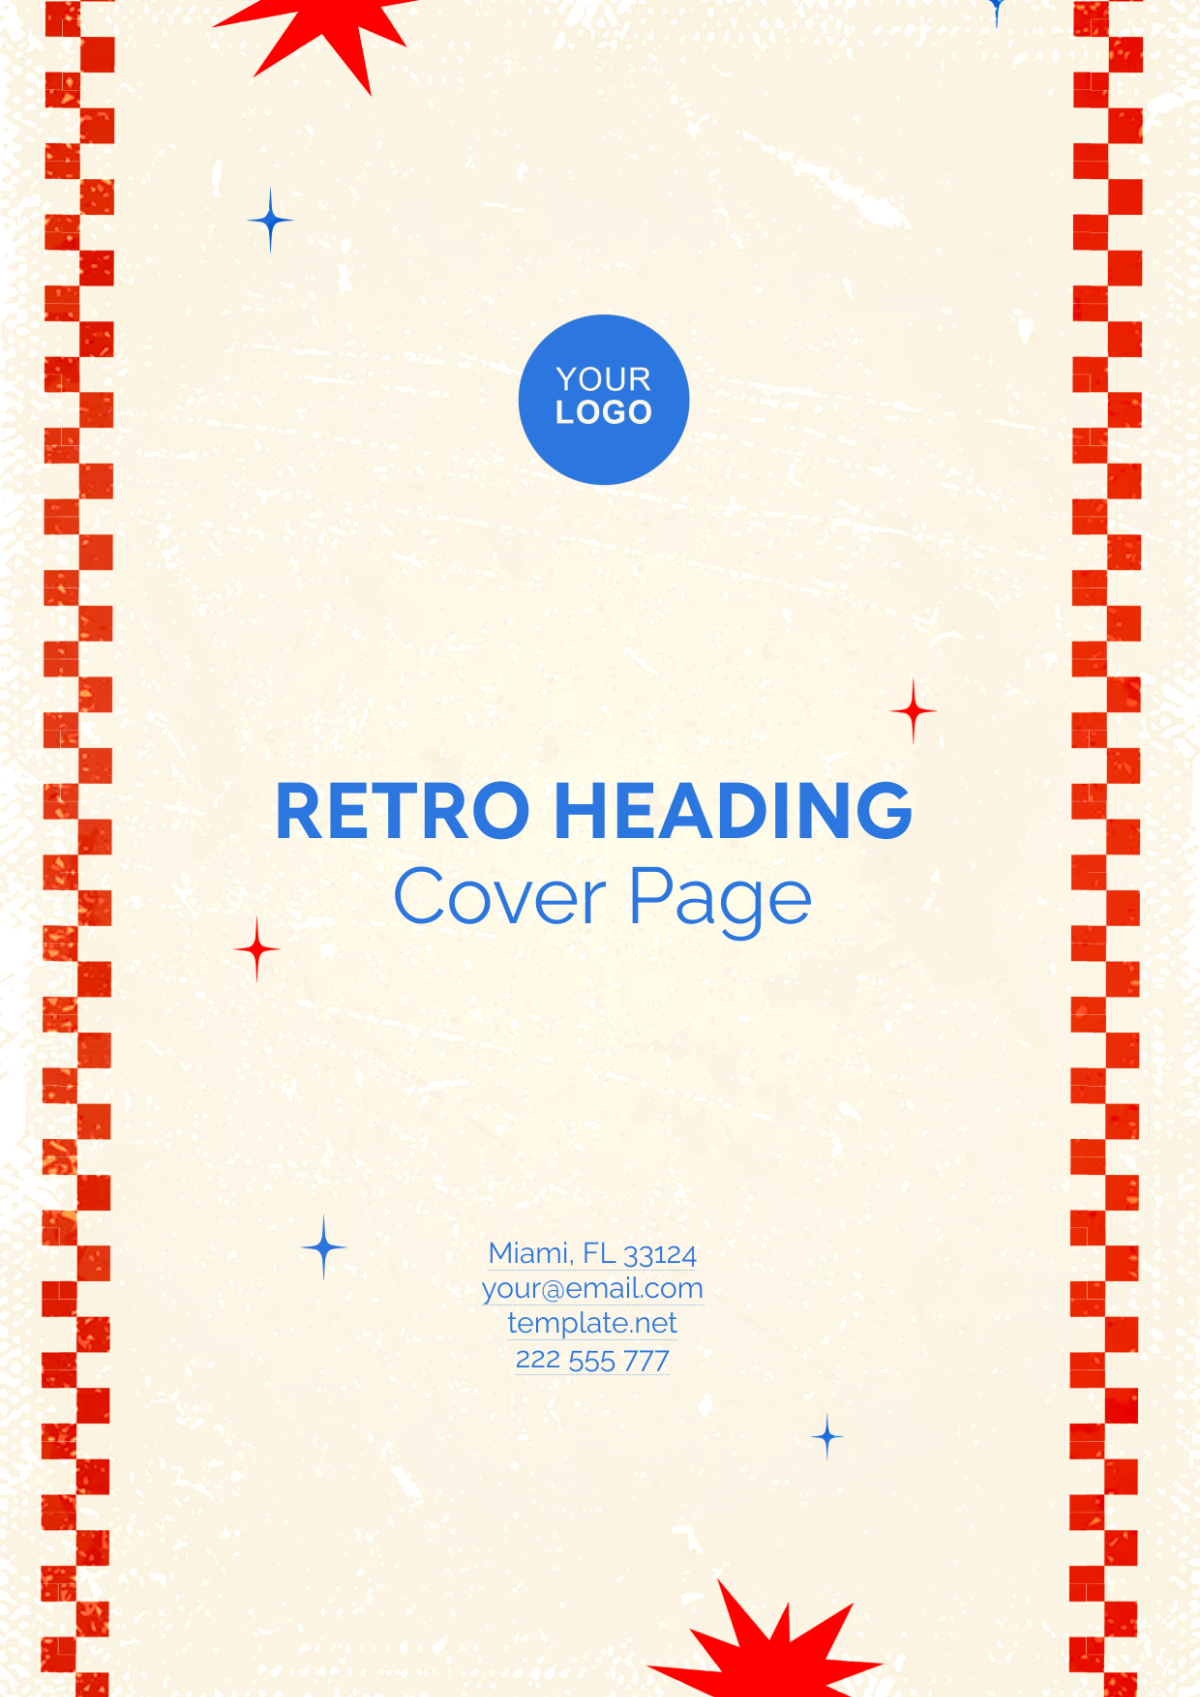 Free Retro Heading Cover Page Template